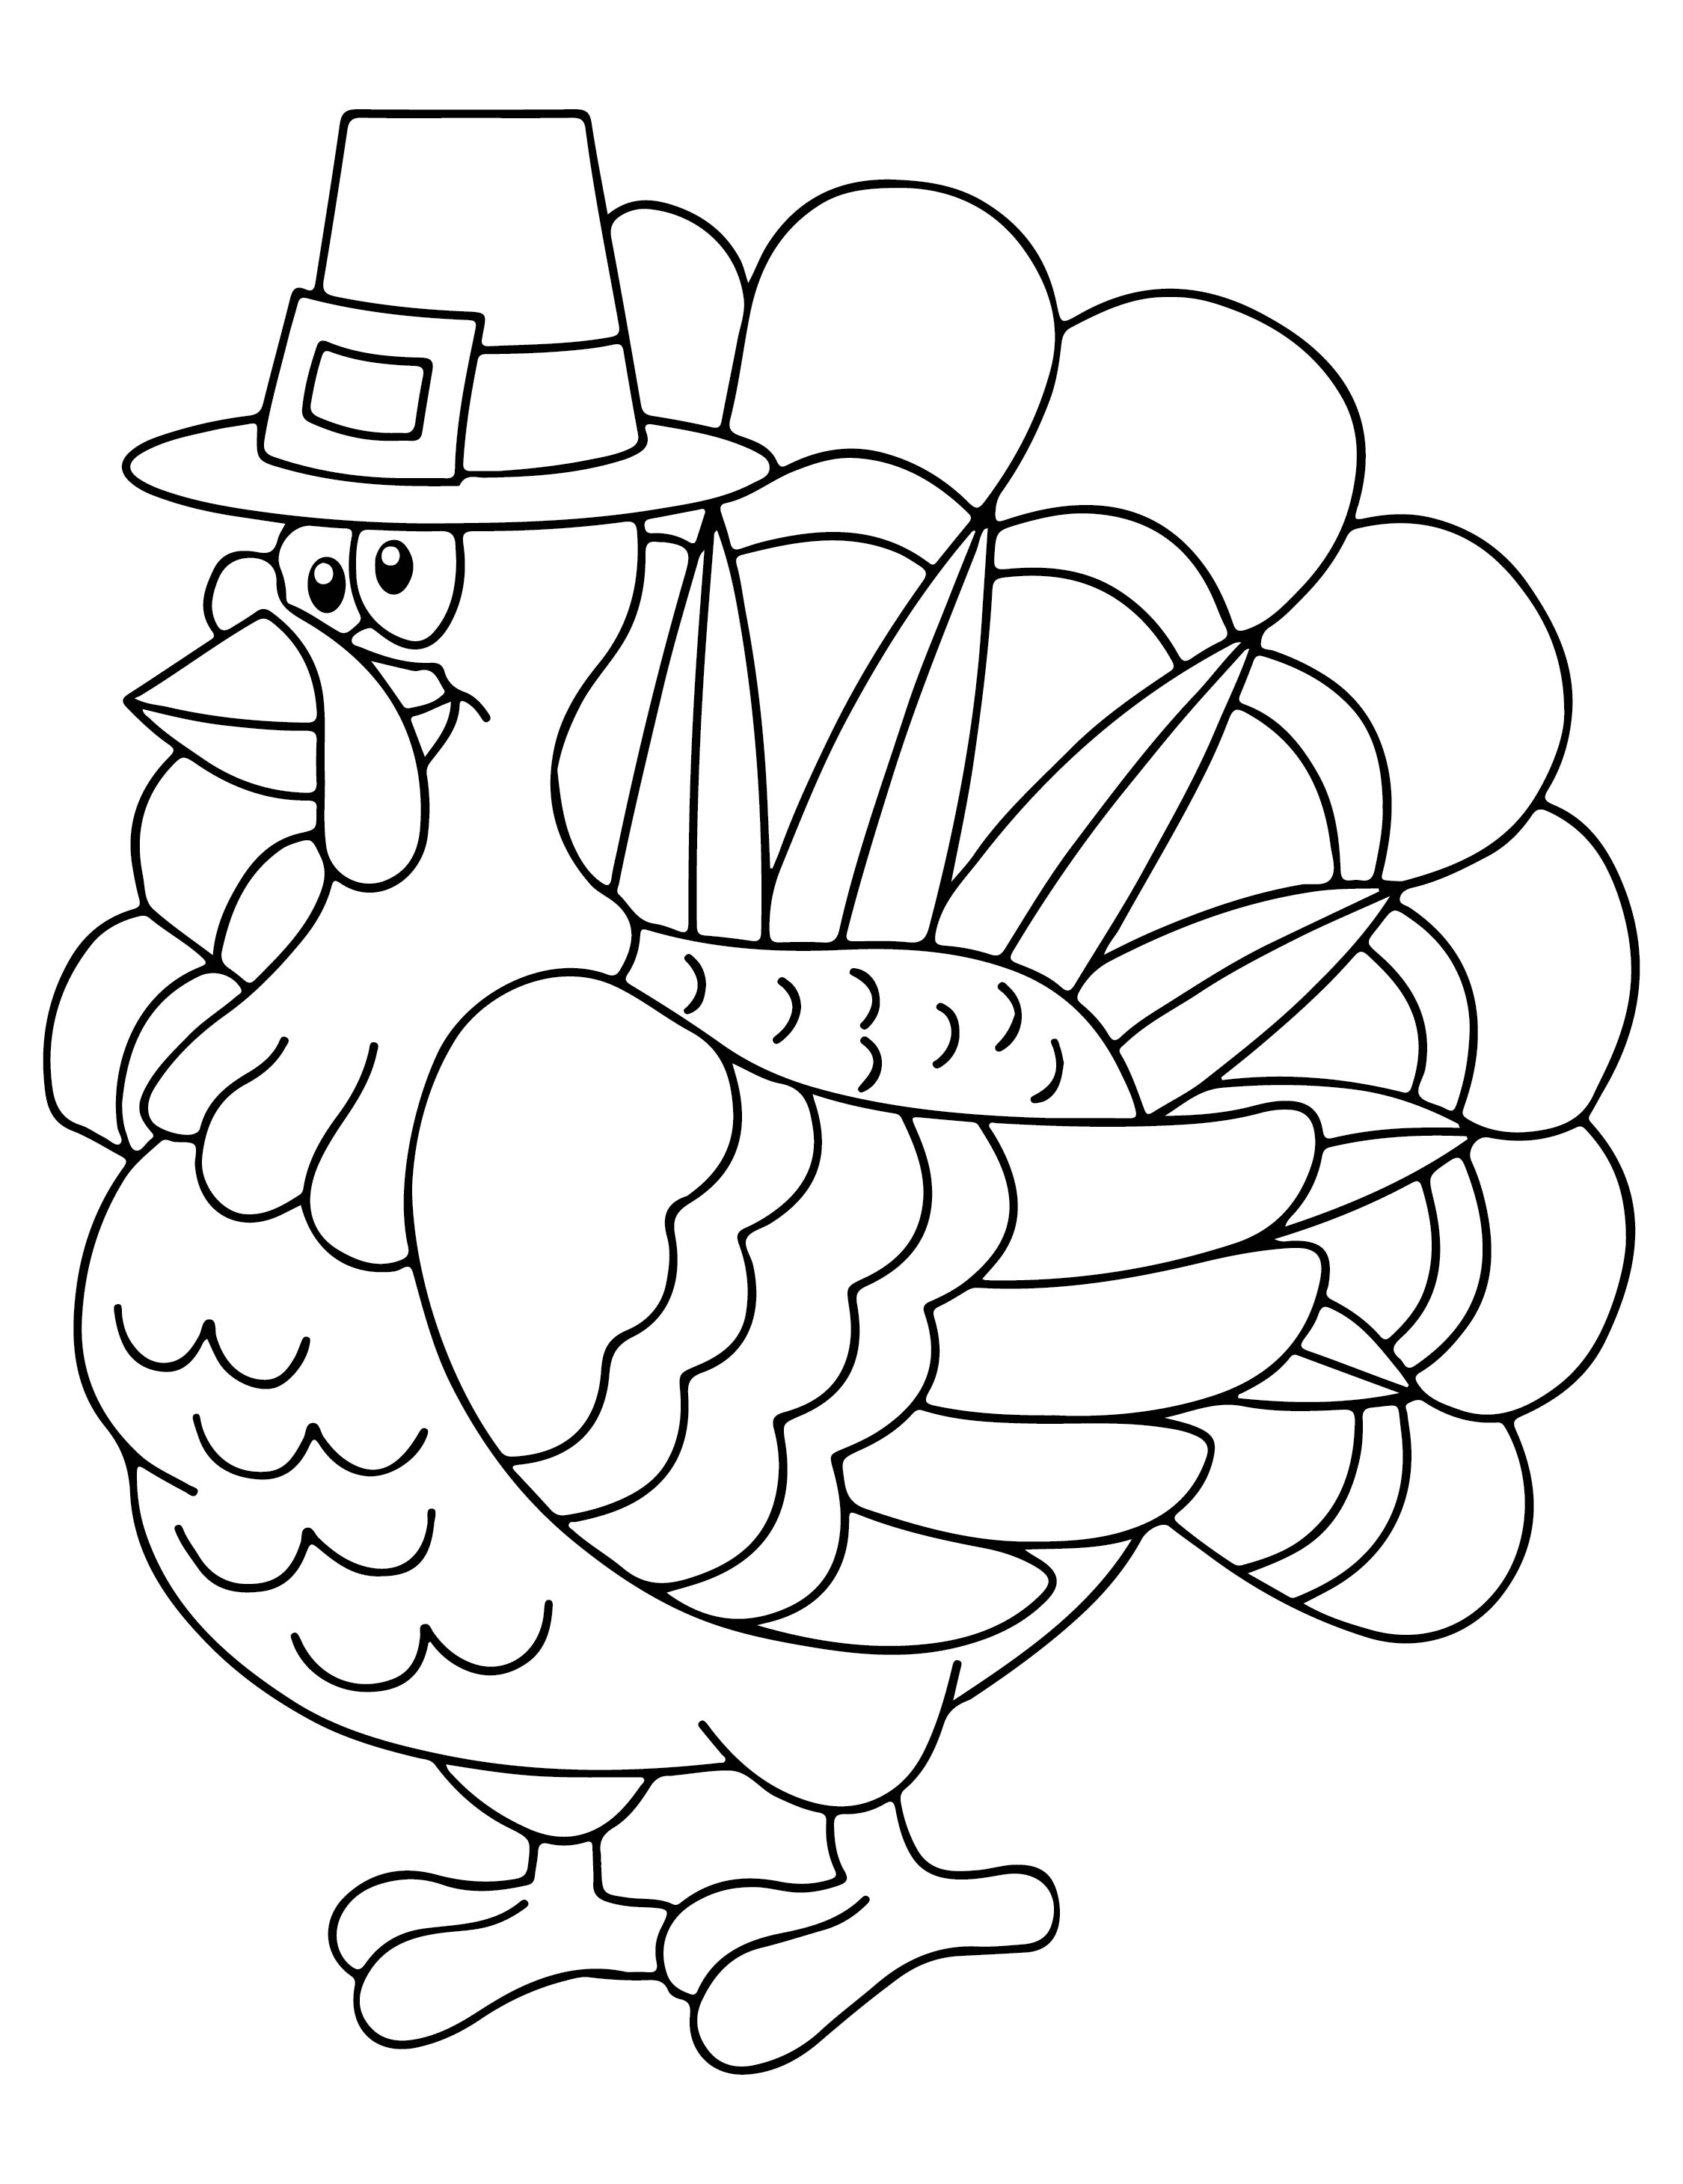 6-best-images-of-thanksgiving-printable-activity-sheets-free